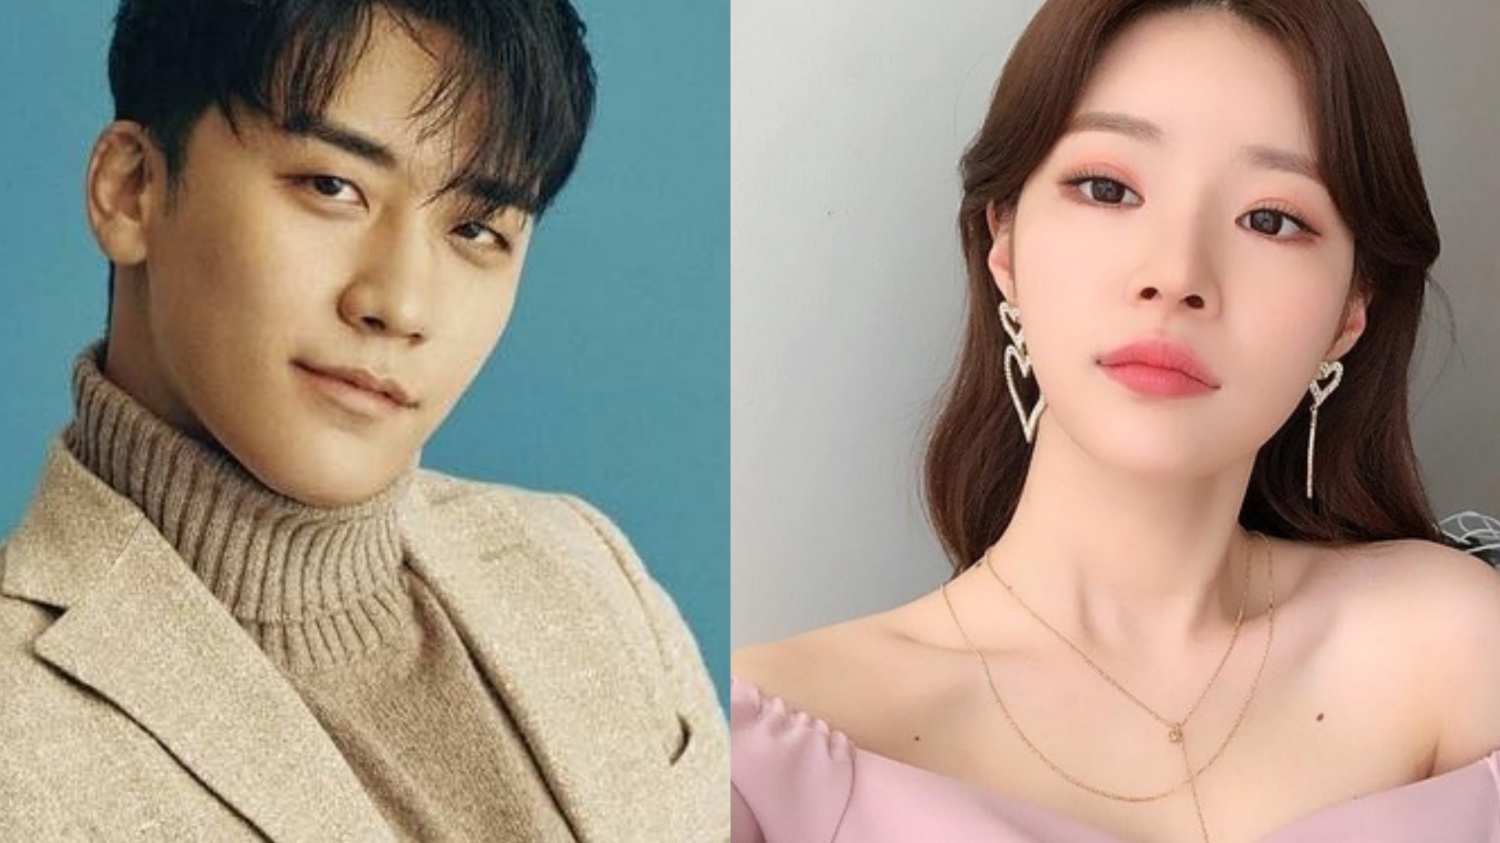 Agency of Seungri’s Alleged Girlfriend Responds to Dating Rumors